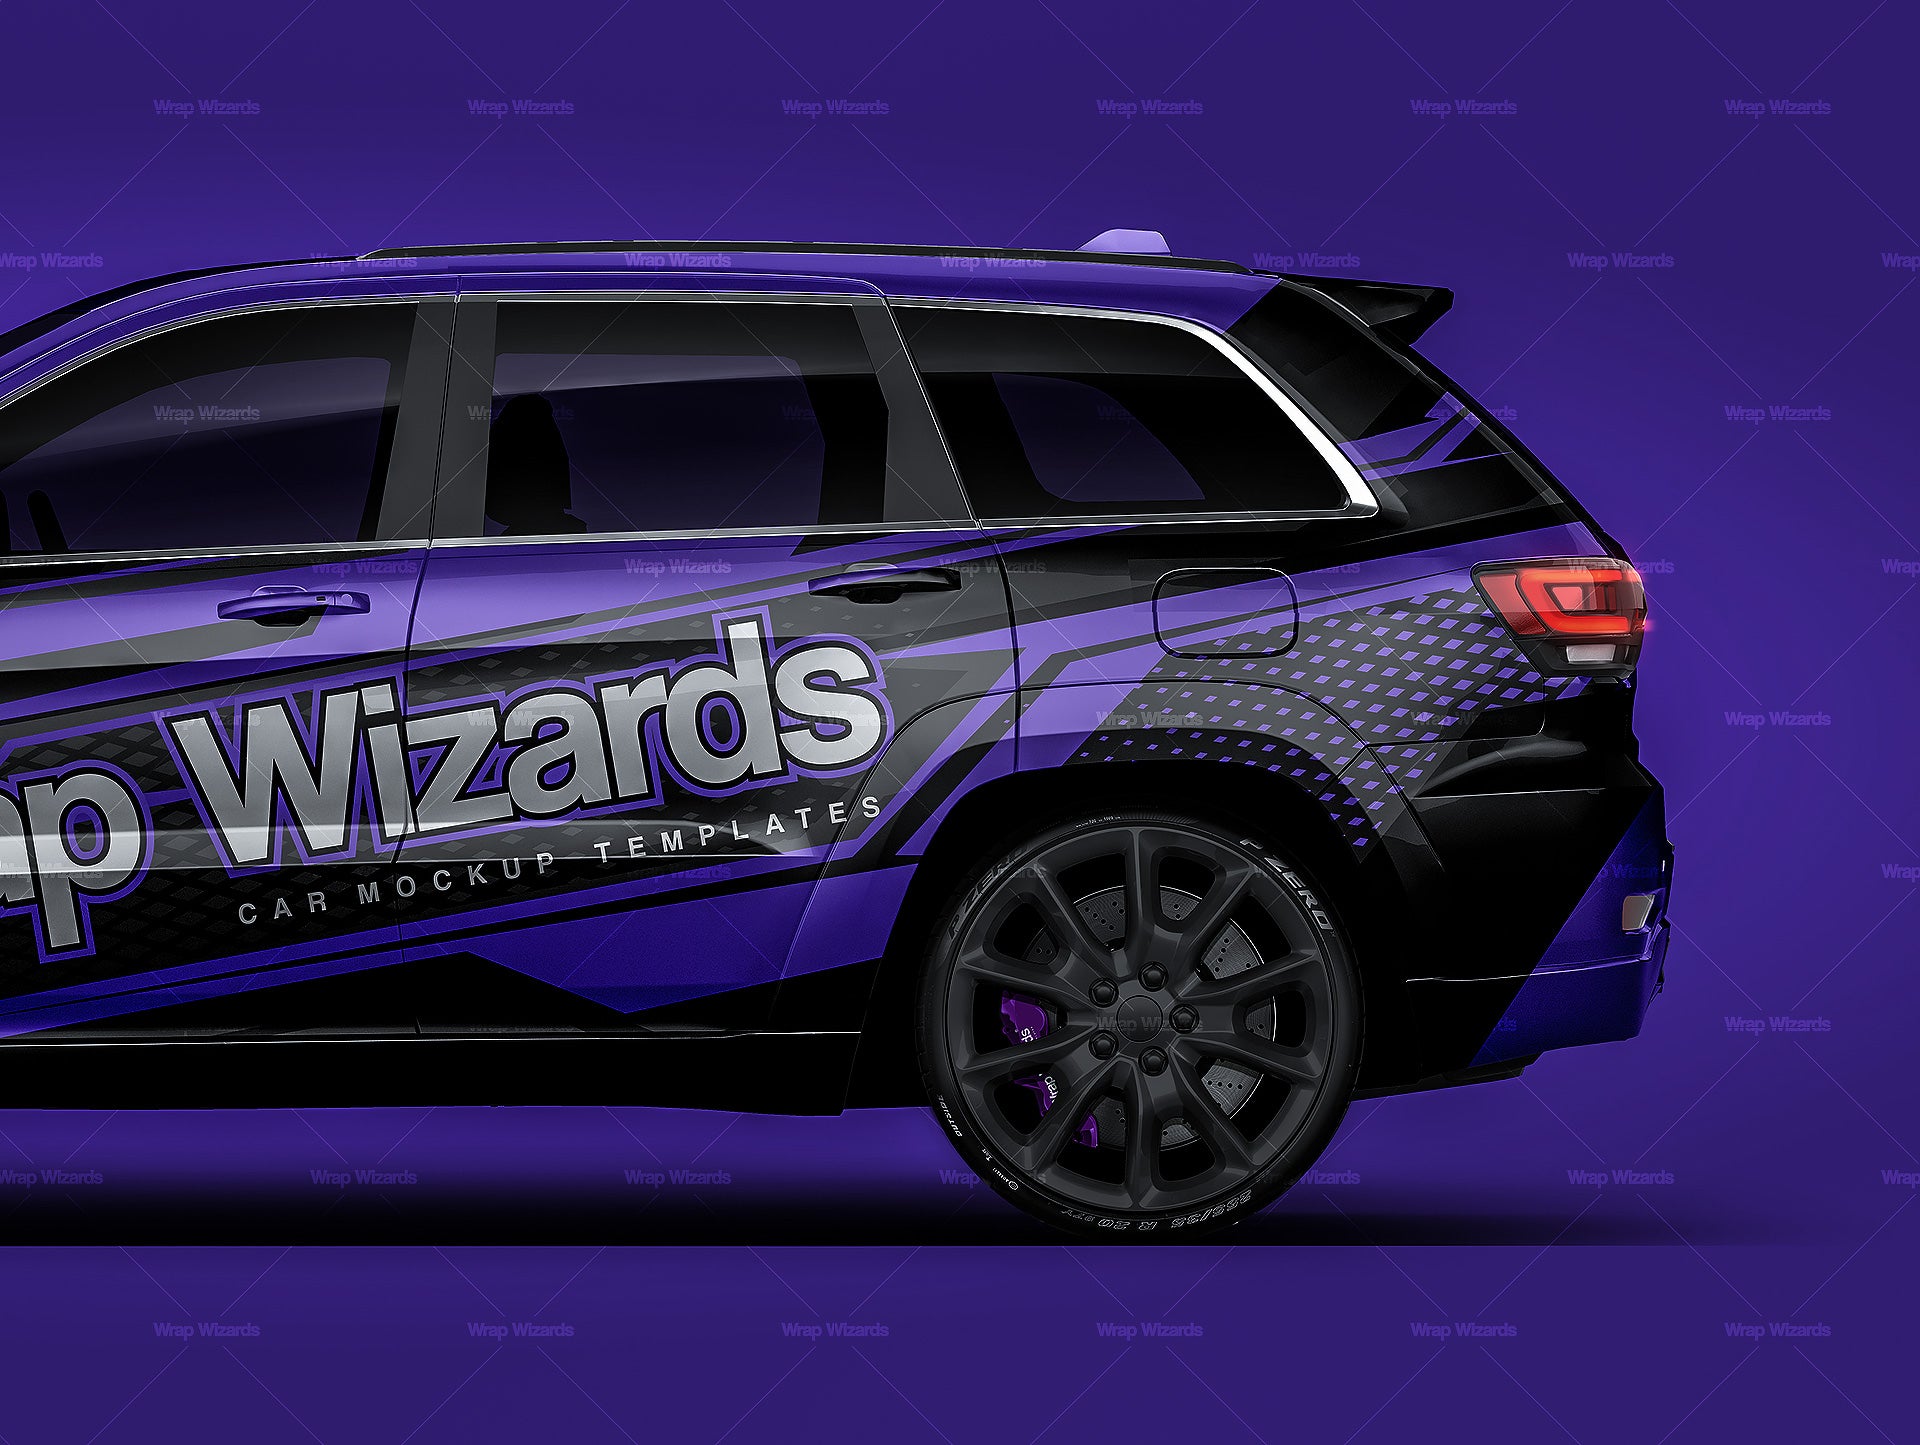 Jeep Grand Cherokee Overland glossy finish - all sides Car Mockup Template.psd